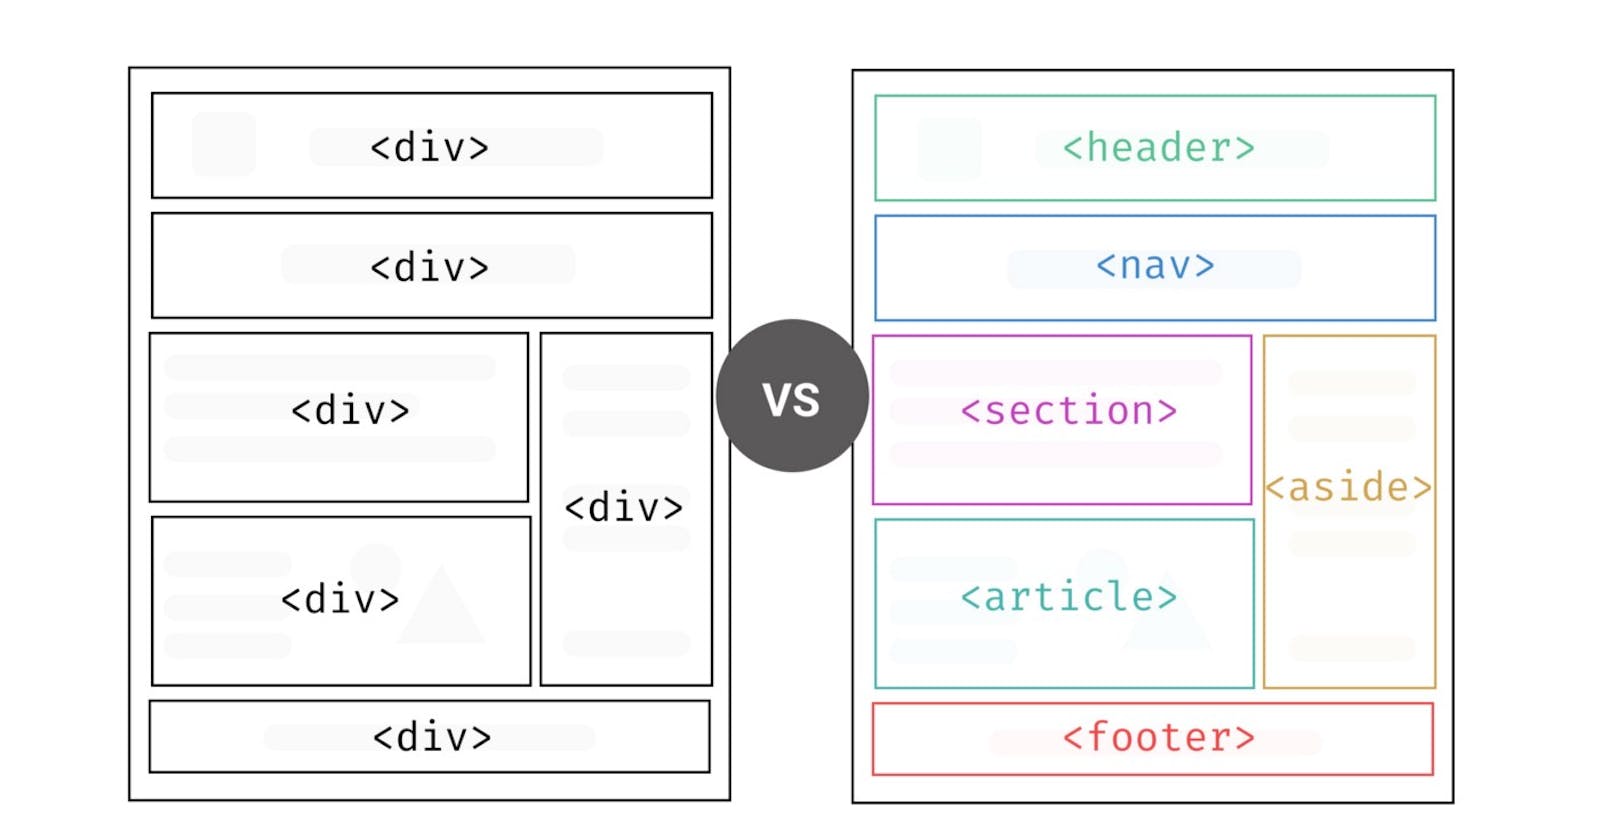 Why one should use HTML5 semantics over divs